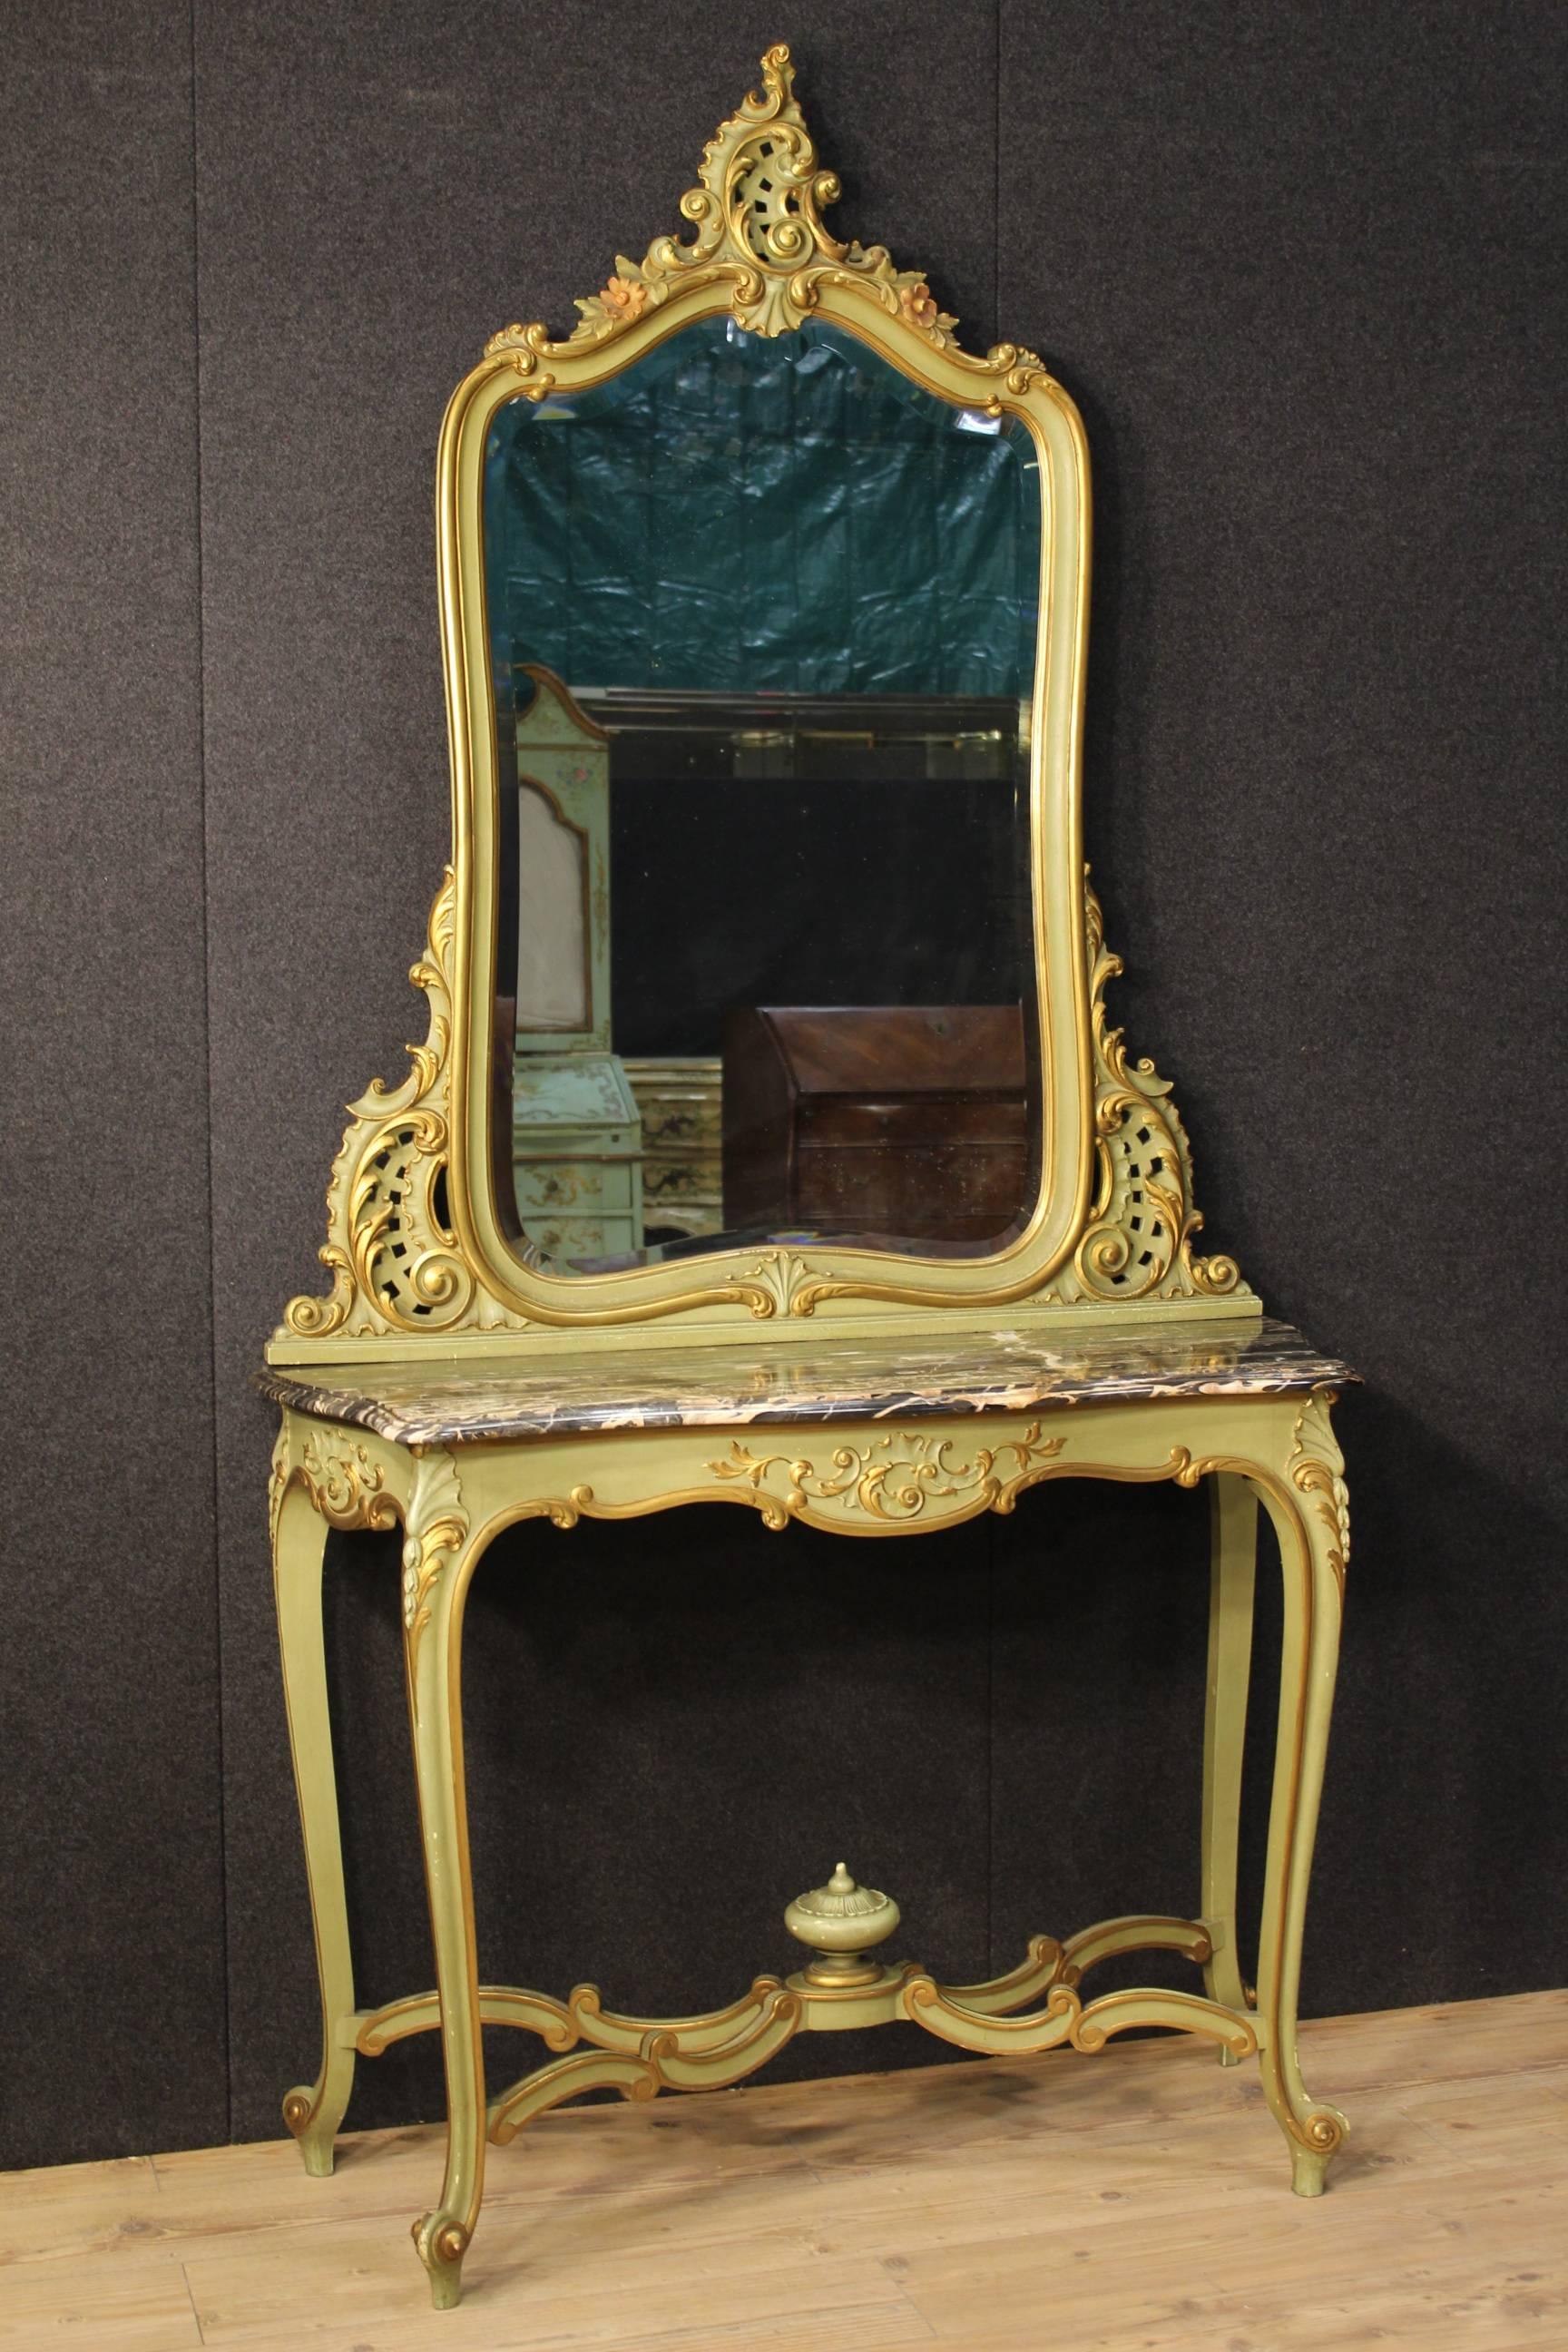 Console table with Italian mirror of the 20th century. Furniture in ornately carved, lacquered and golden wood. Console table with four legs with top in marble. Original mirror in perfect conditions. In good conditions, with some little falls of